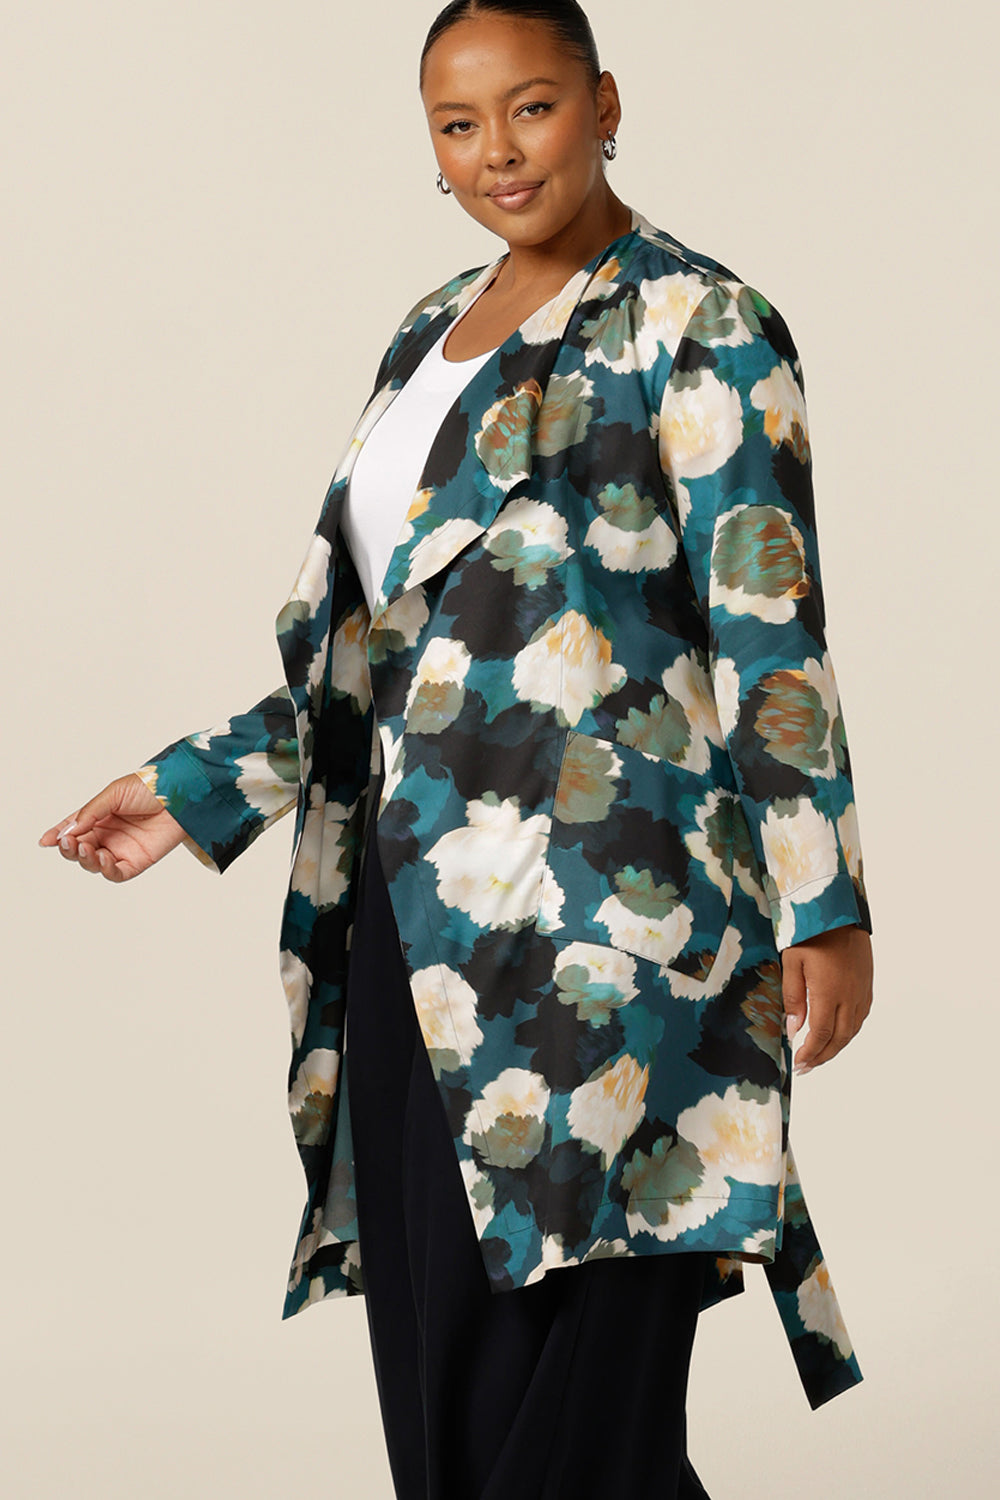 a size 18, curvy woman wears a trench coat-style jacket with waterfall front, patch pockets and belt tie. A luxury jacket, shop it in plus sizes for fuller figure online at Australian and new zealand womens clothing brand, leina and fleur. 